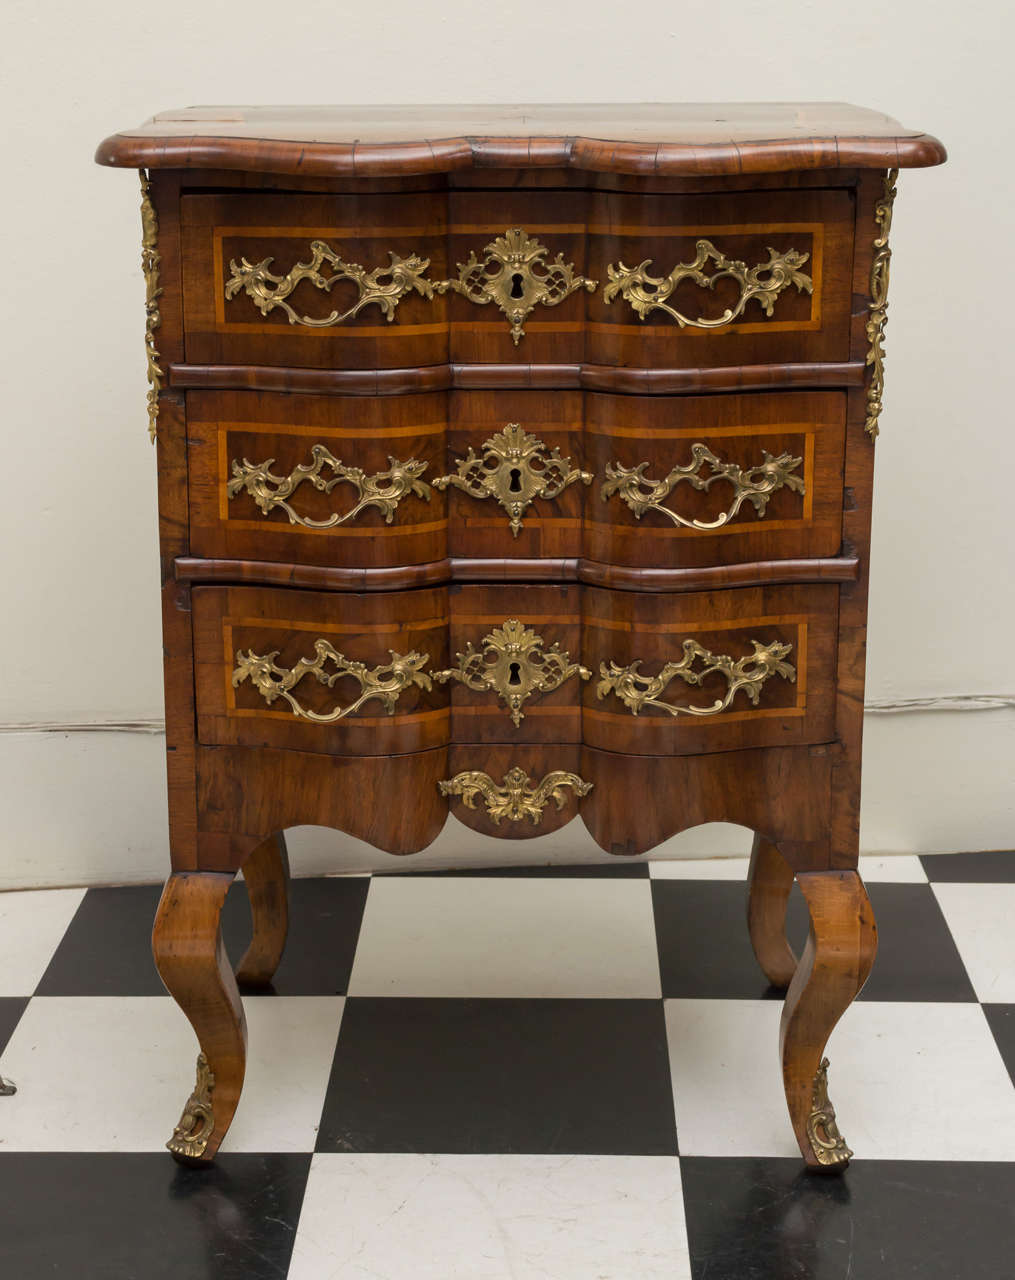 Diminutive 18th century German walnut Rococo commode. Stylish shaped top and front with figured walnut veneers. crossbanded top and drawers all fitted with gilt brass mounts. Three well-proportioned drawers over stout cabriole legs. Refinished,